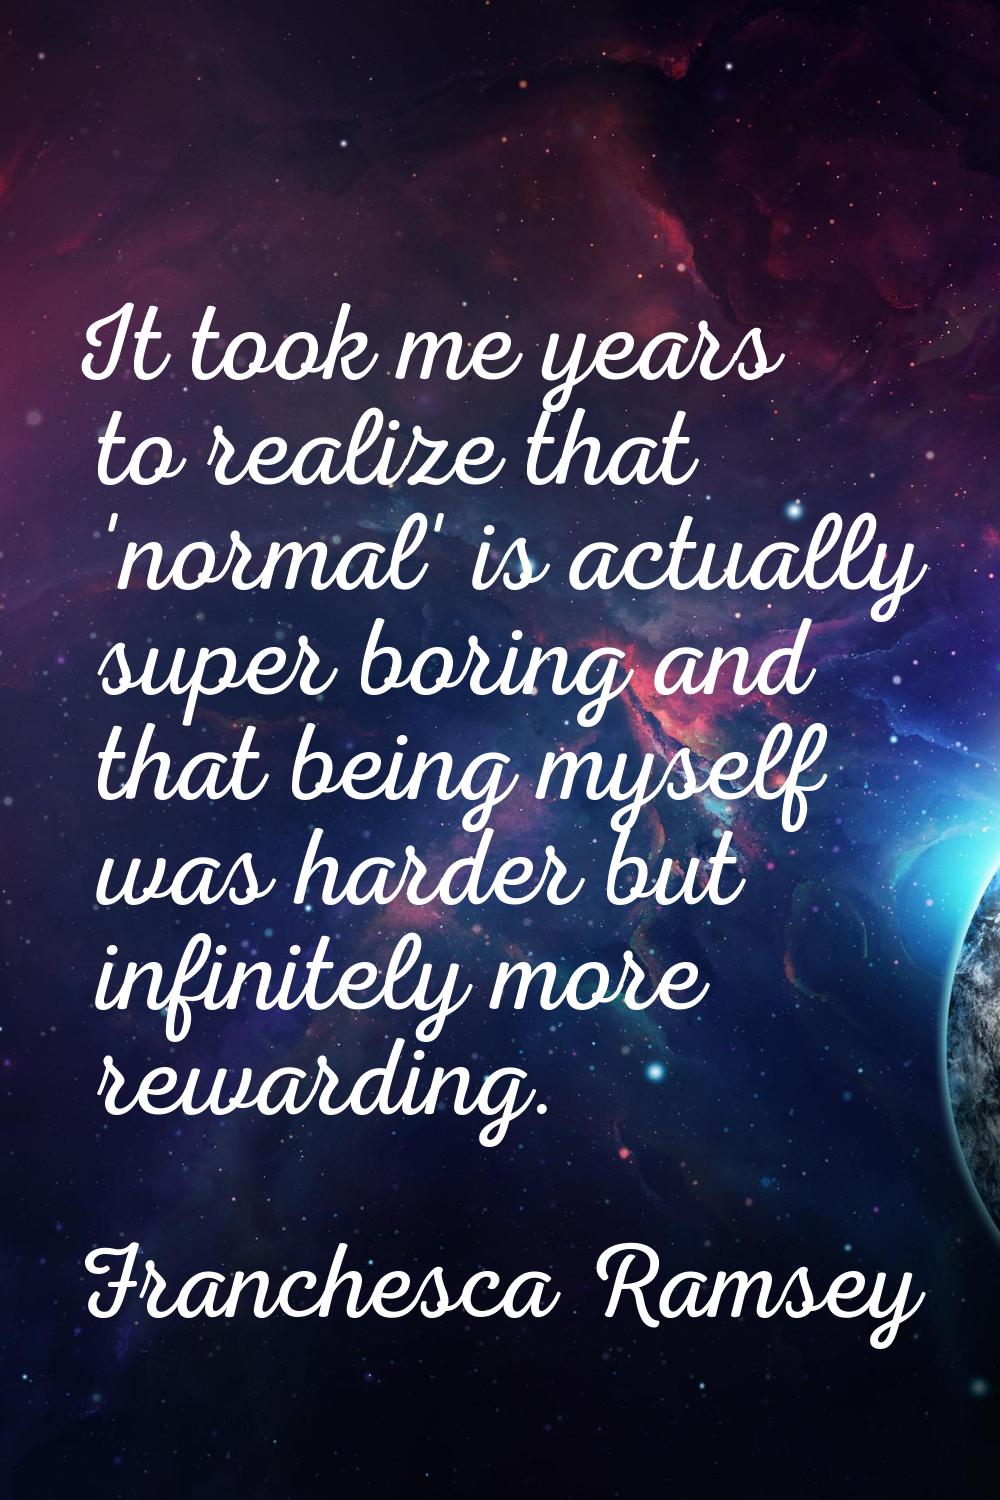 It took me years to realize that 'normal' is actually super boring and that being myself was harder